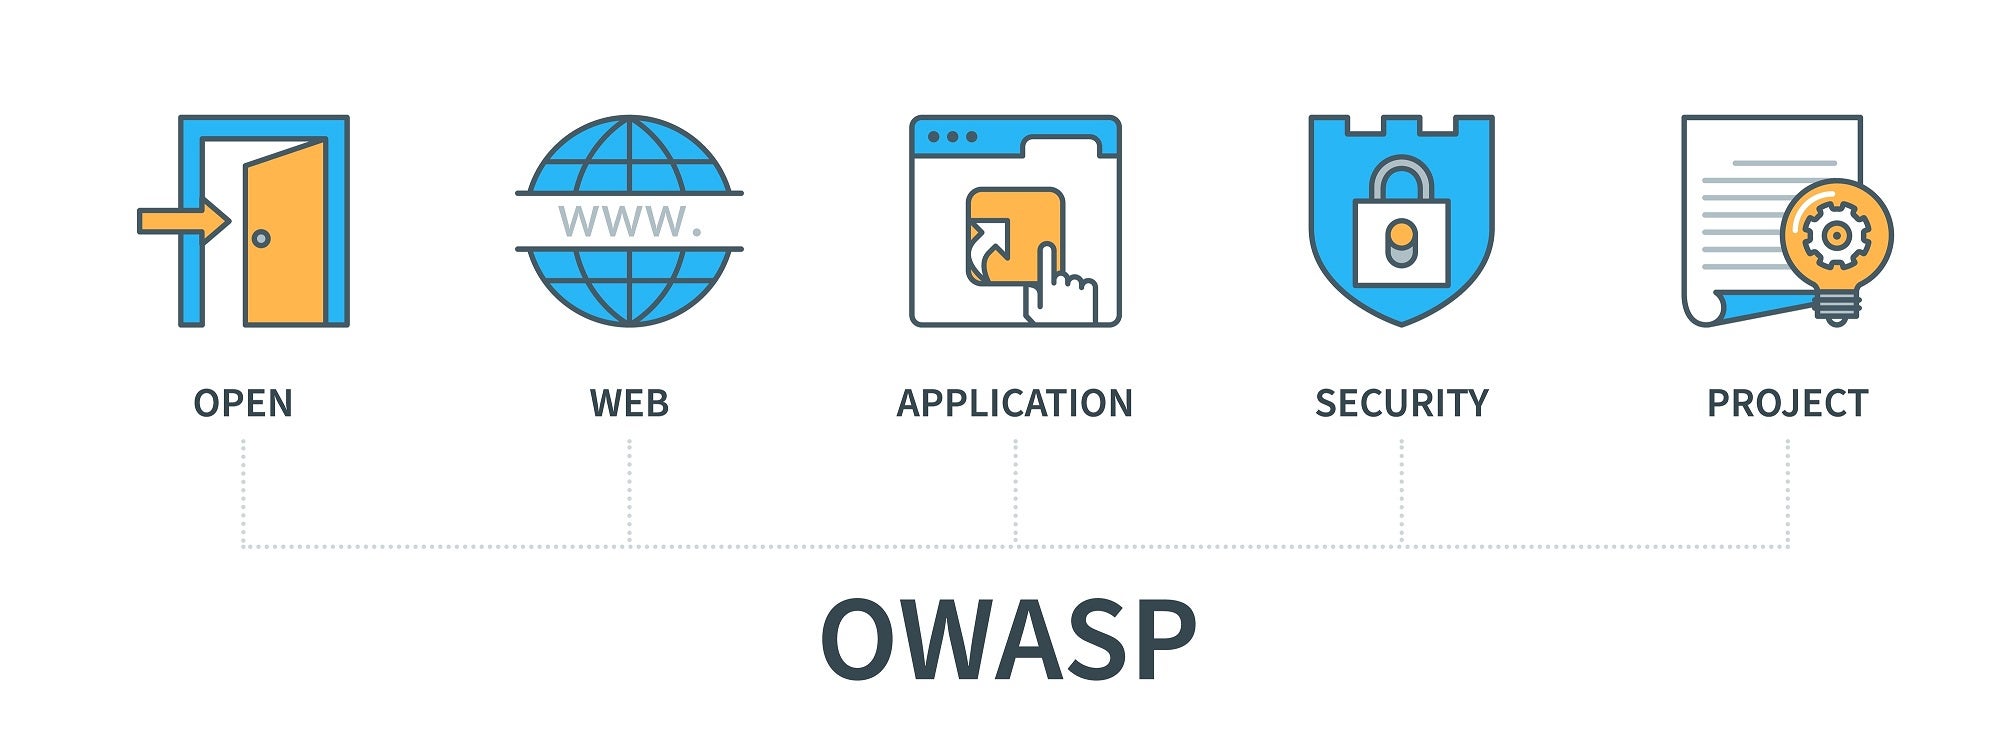 OWASP Open Web Application Security Project